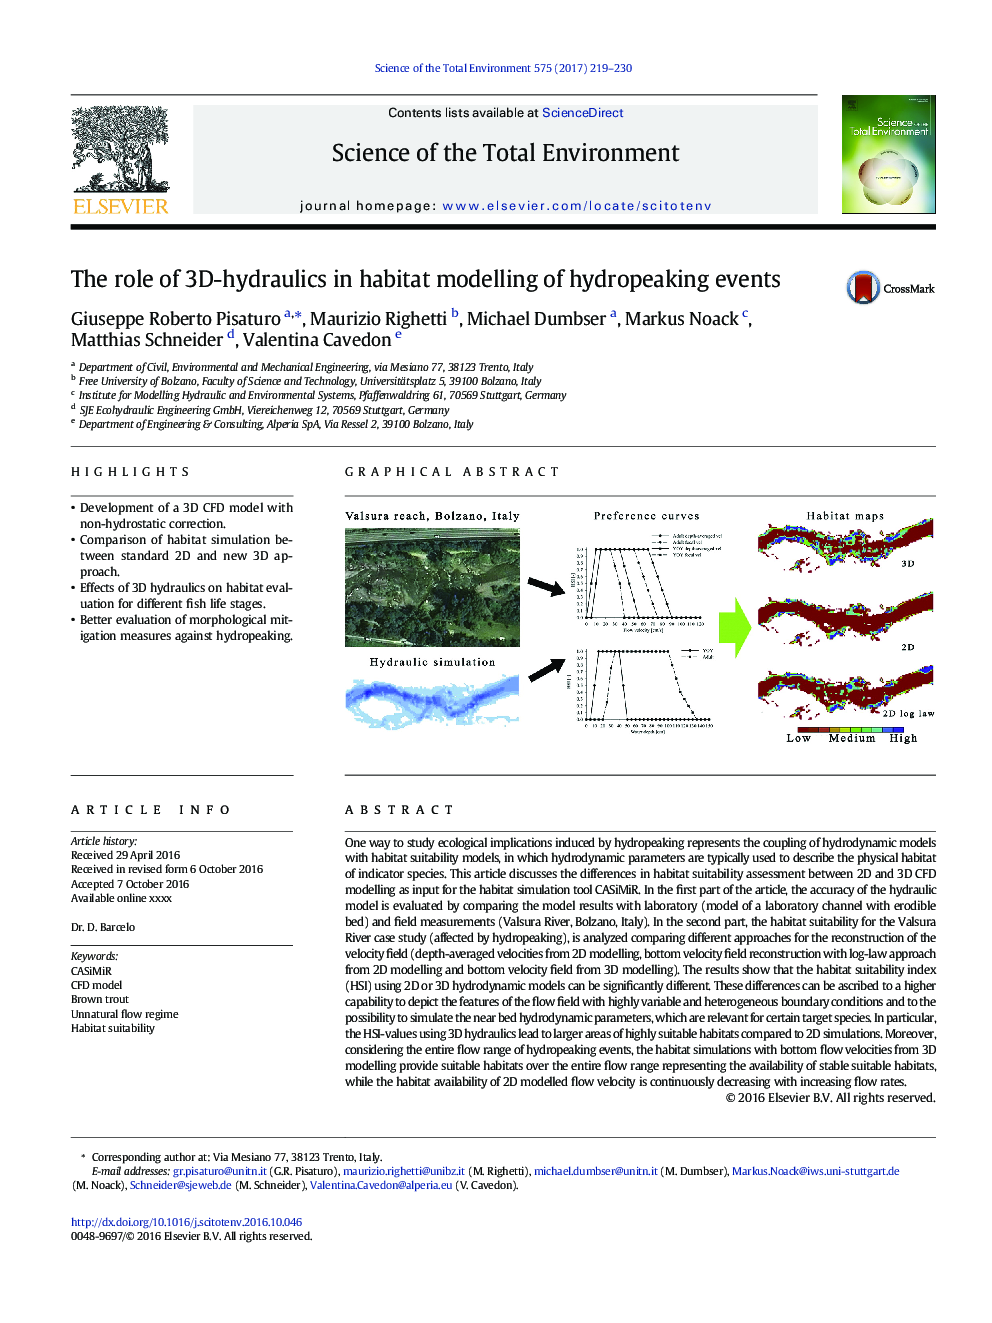 The role of 3D-hydraulics in habitat modelling of hydropeaking events